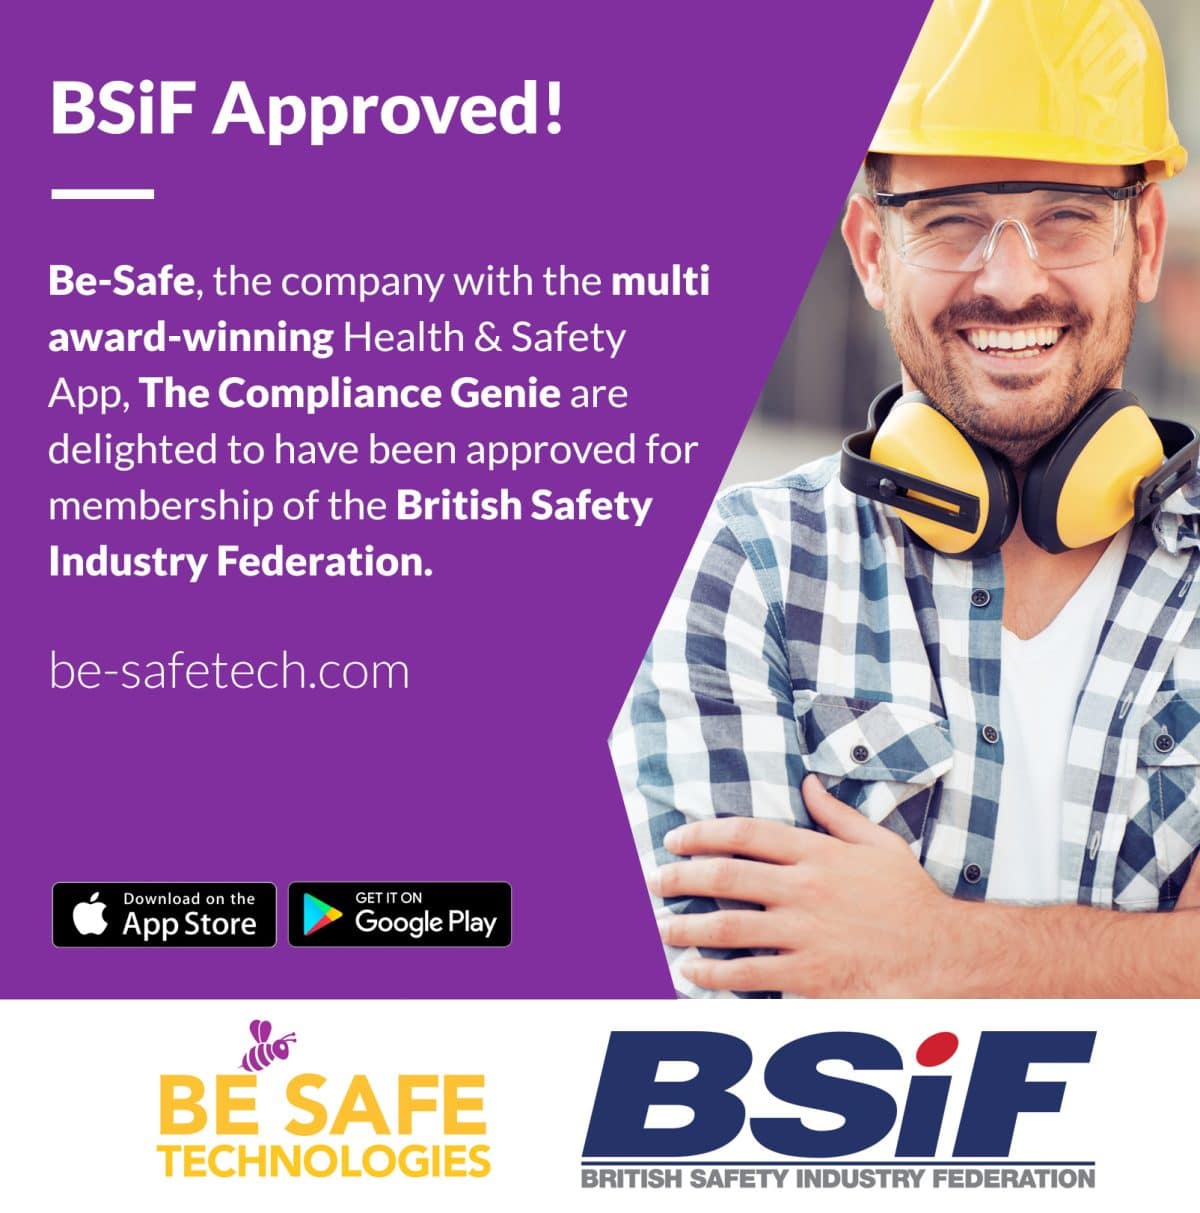 BSif Approved! Be-Safe Technologies